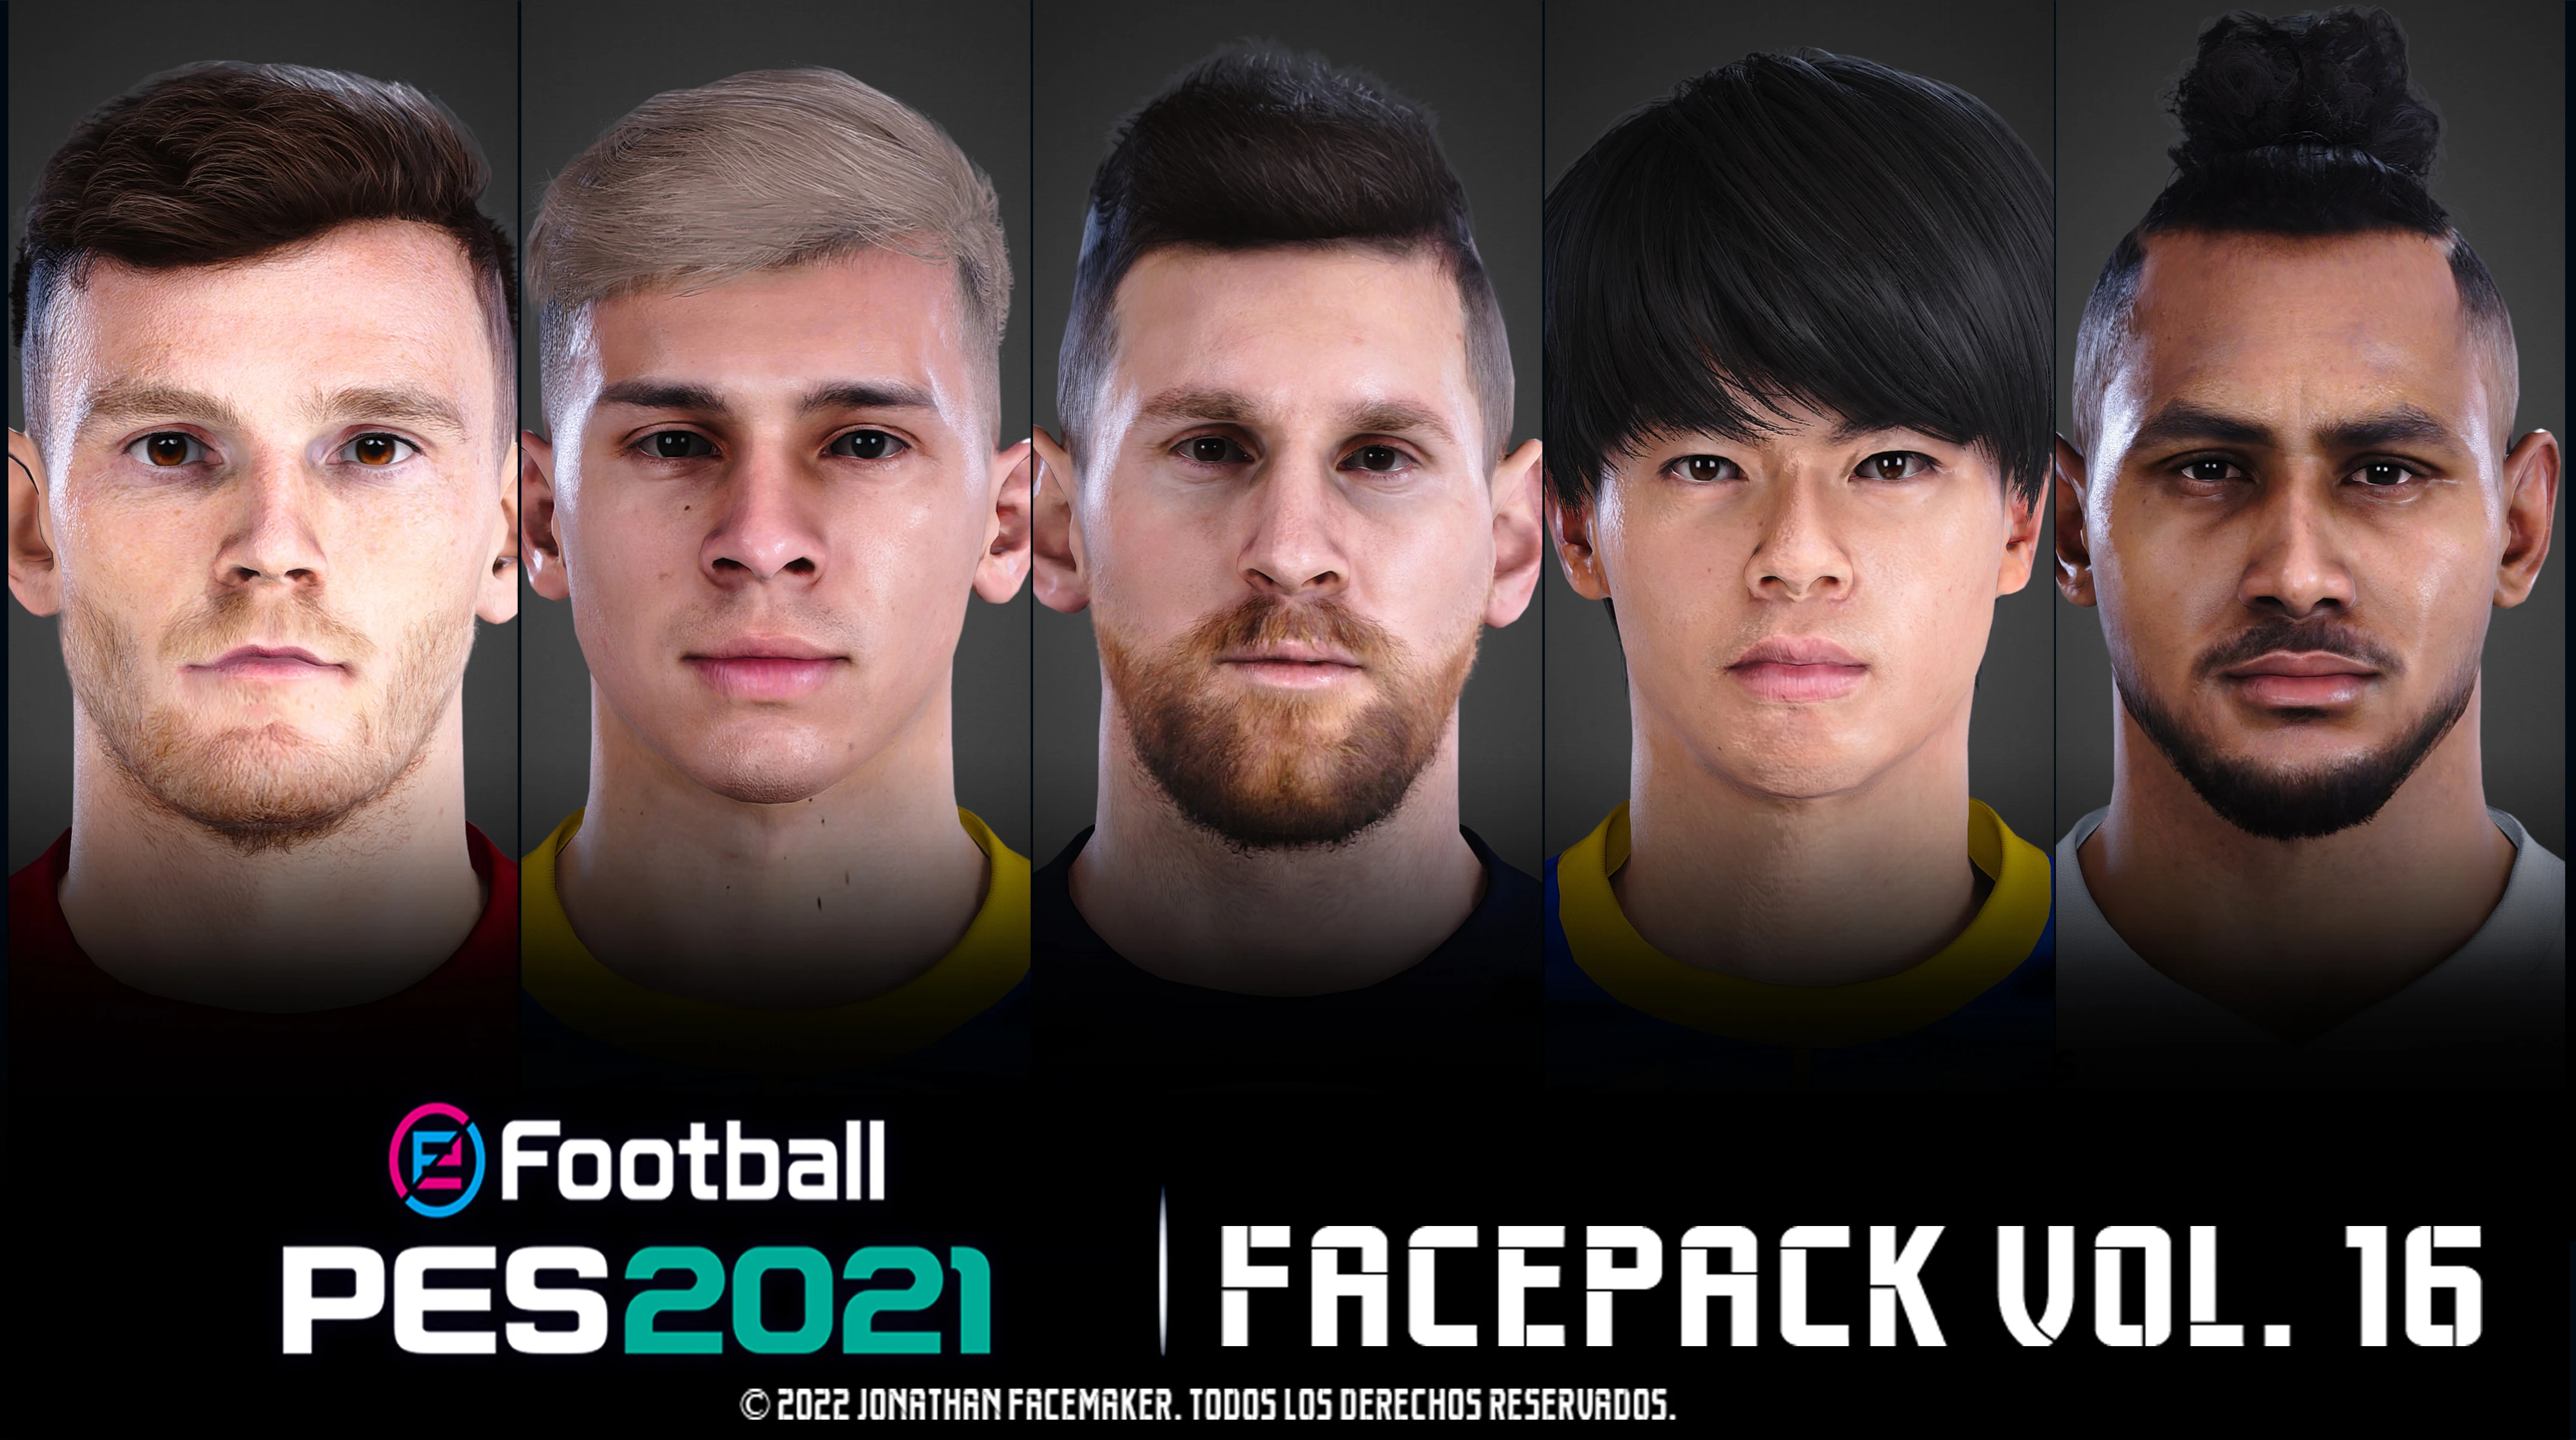 PES 2021 Facepack Vol. 10 by Jonathan Facemaker